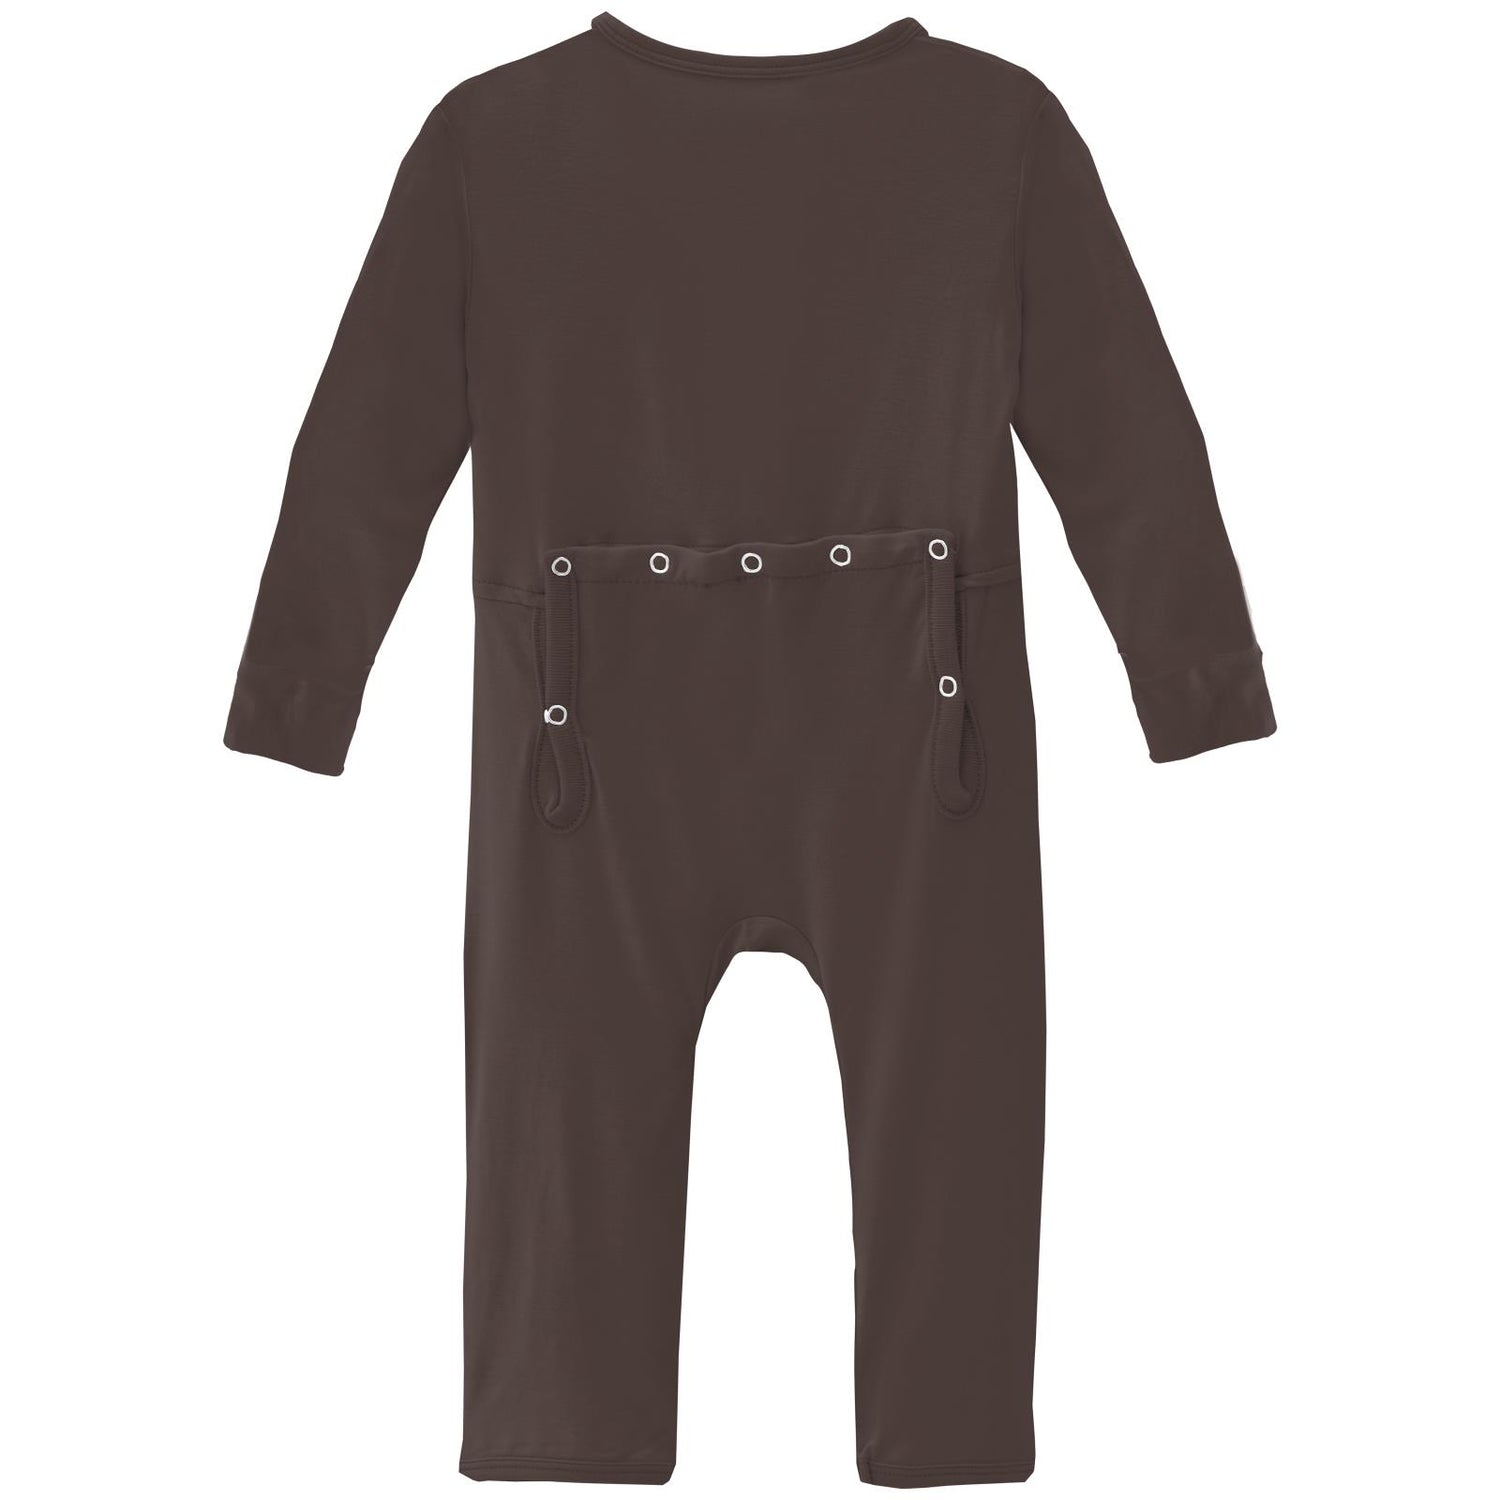 Coverall with 2 Way Zipper in Bark